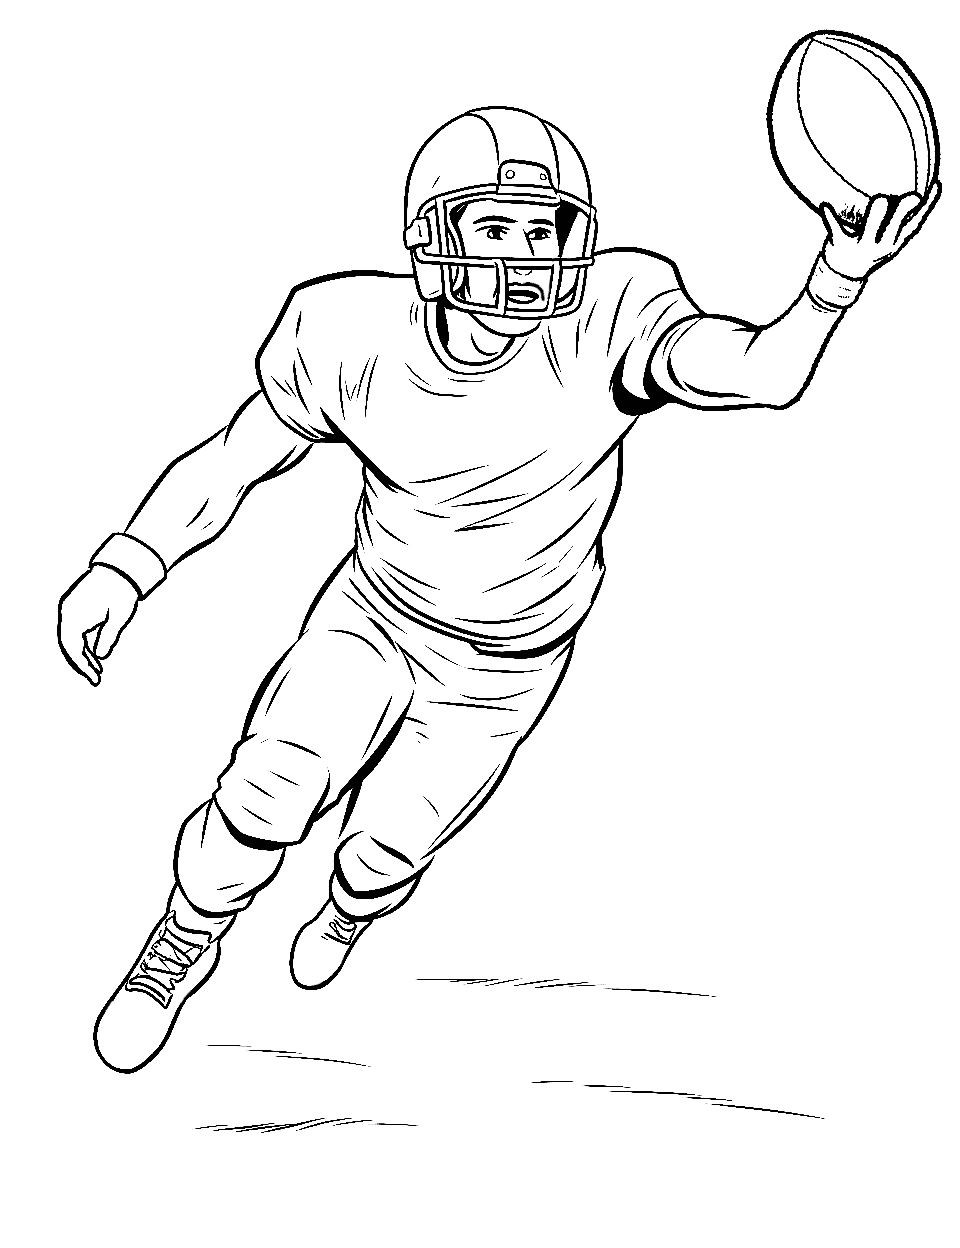 Athletic Leap Coloring Page - A player leaping forward to catch a football.